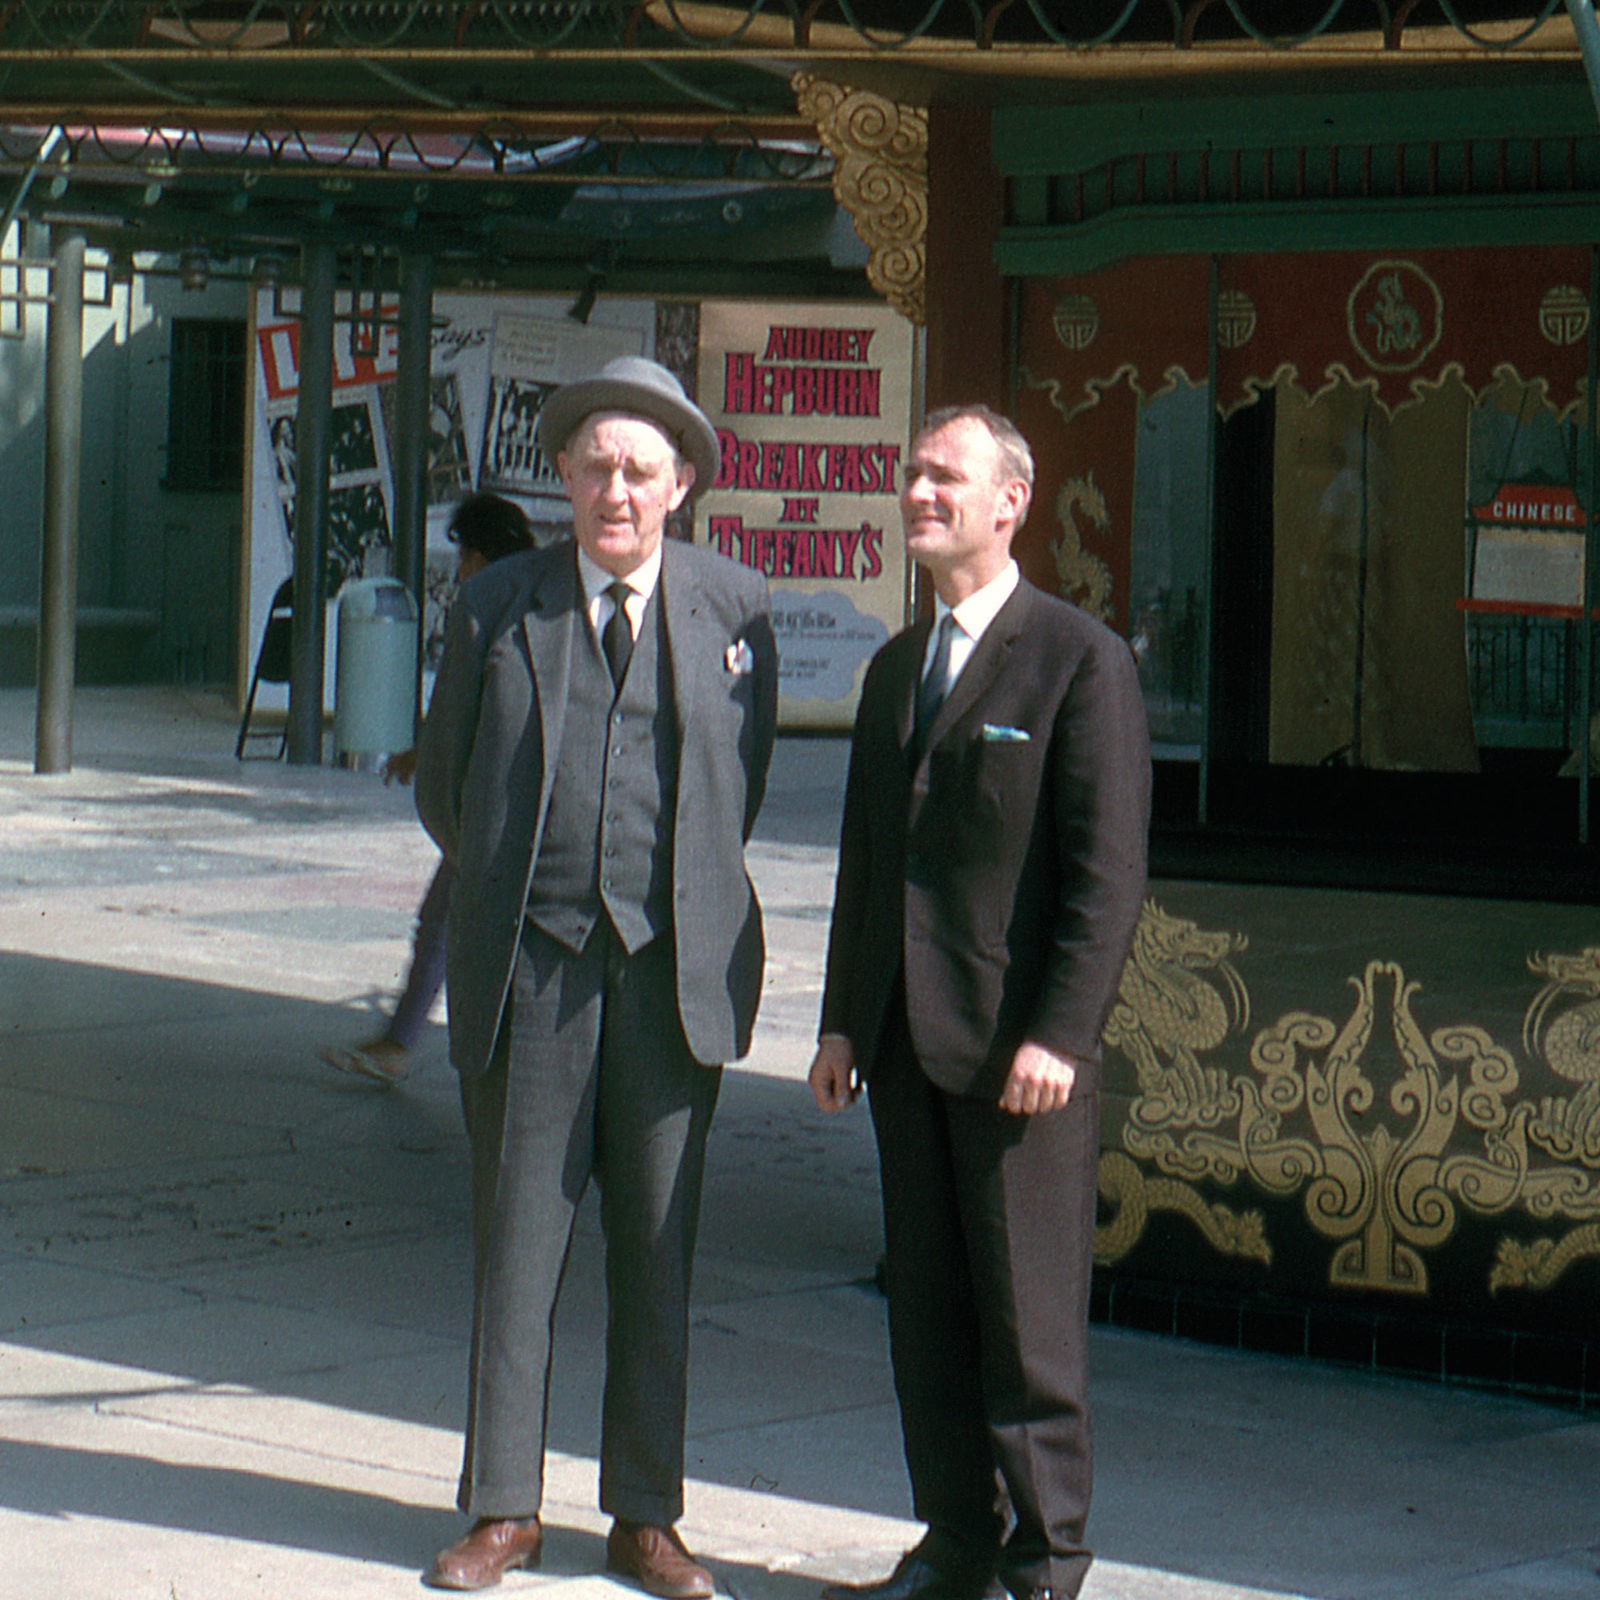 Ingvar and his father Feodor standing on a city street in dark suits and ties, squinting in the sun.